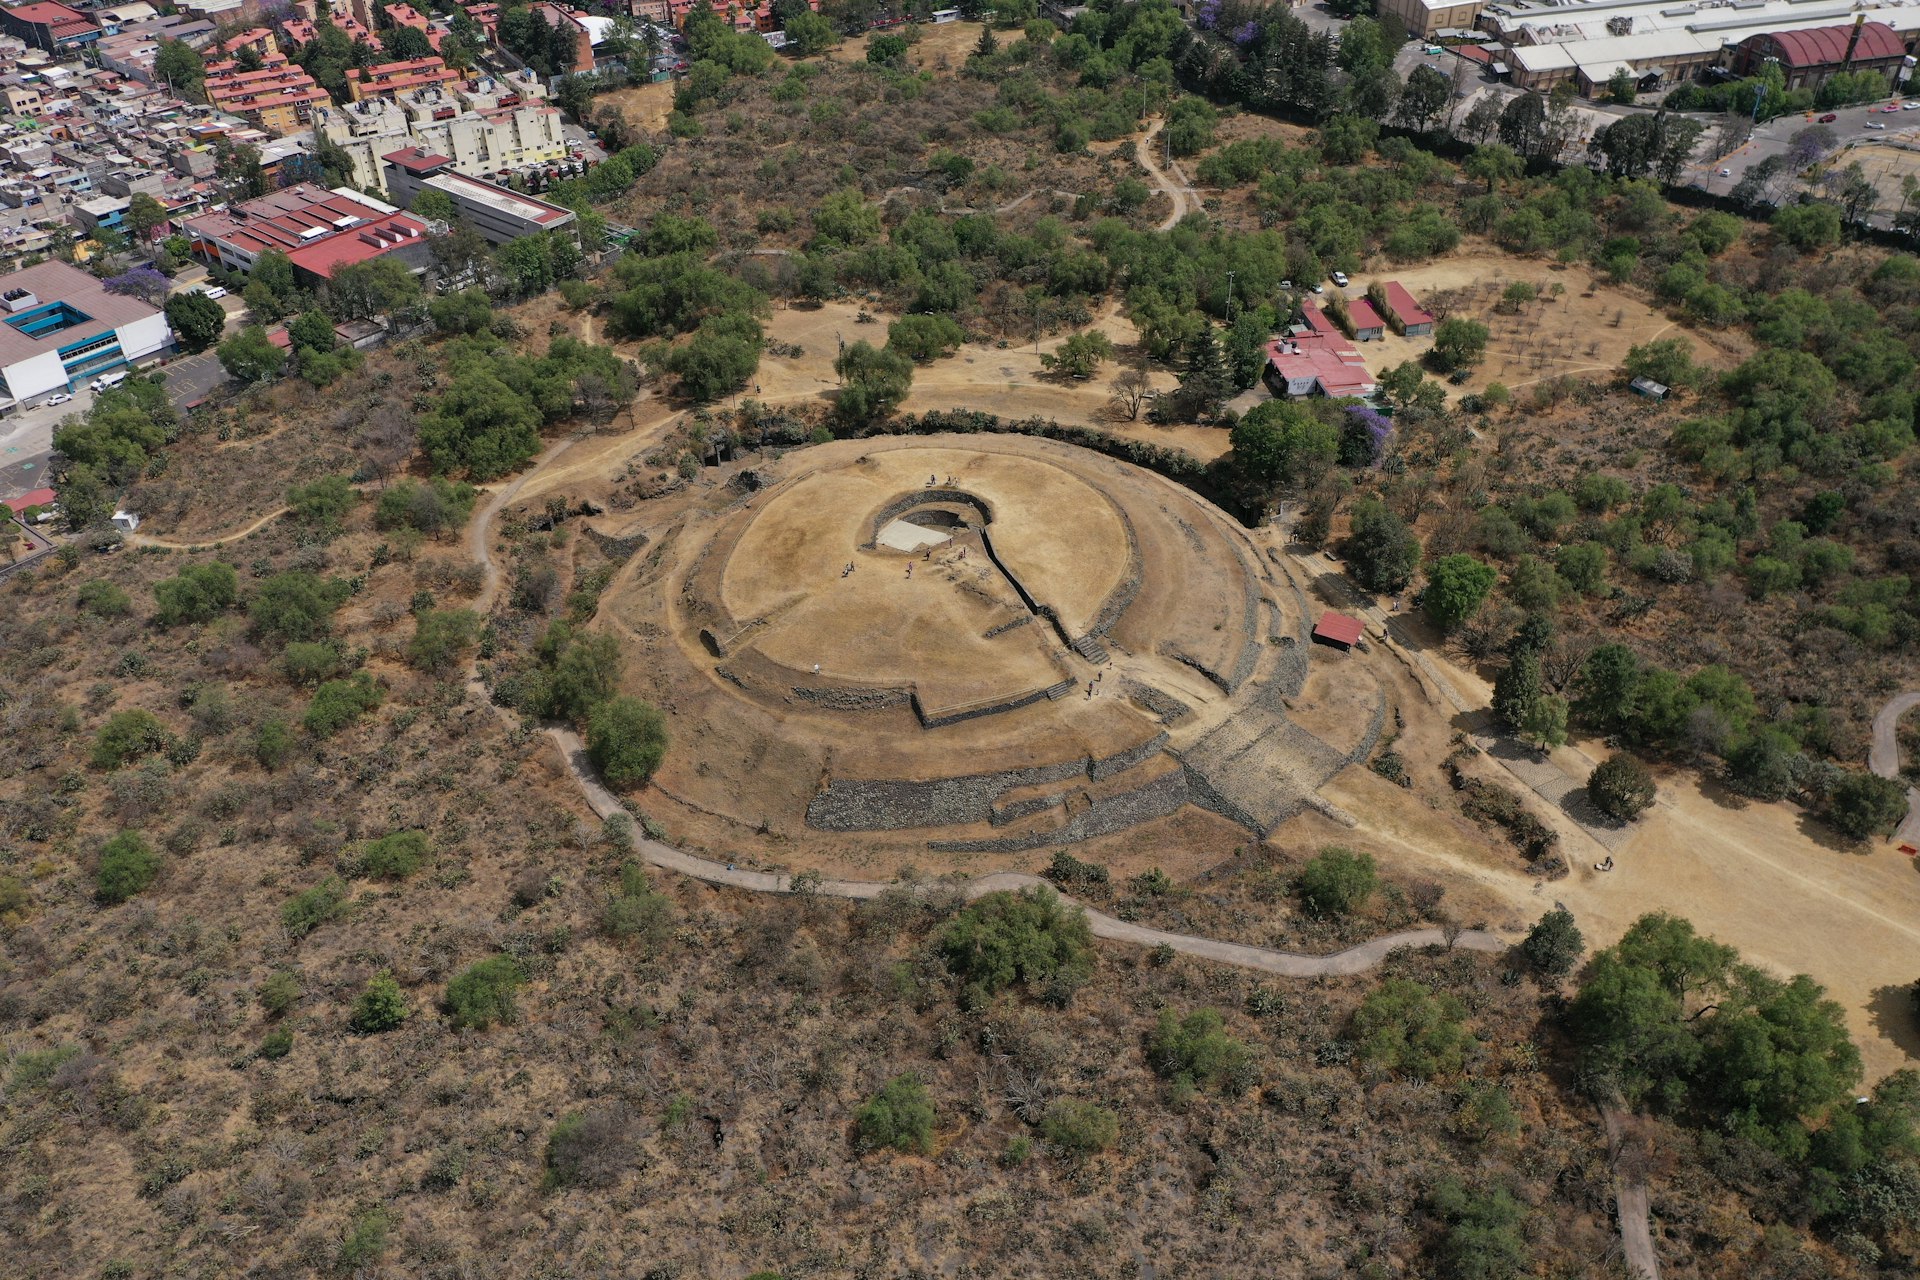 An aerial view of the Cuicuilco Pyramid in Mexico City, Mexico